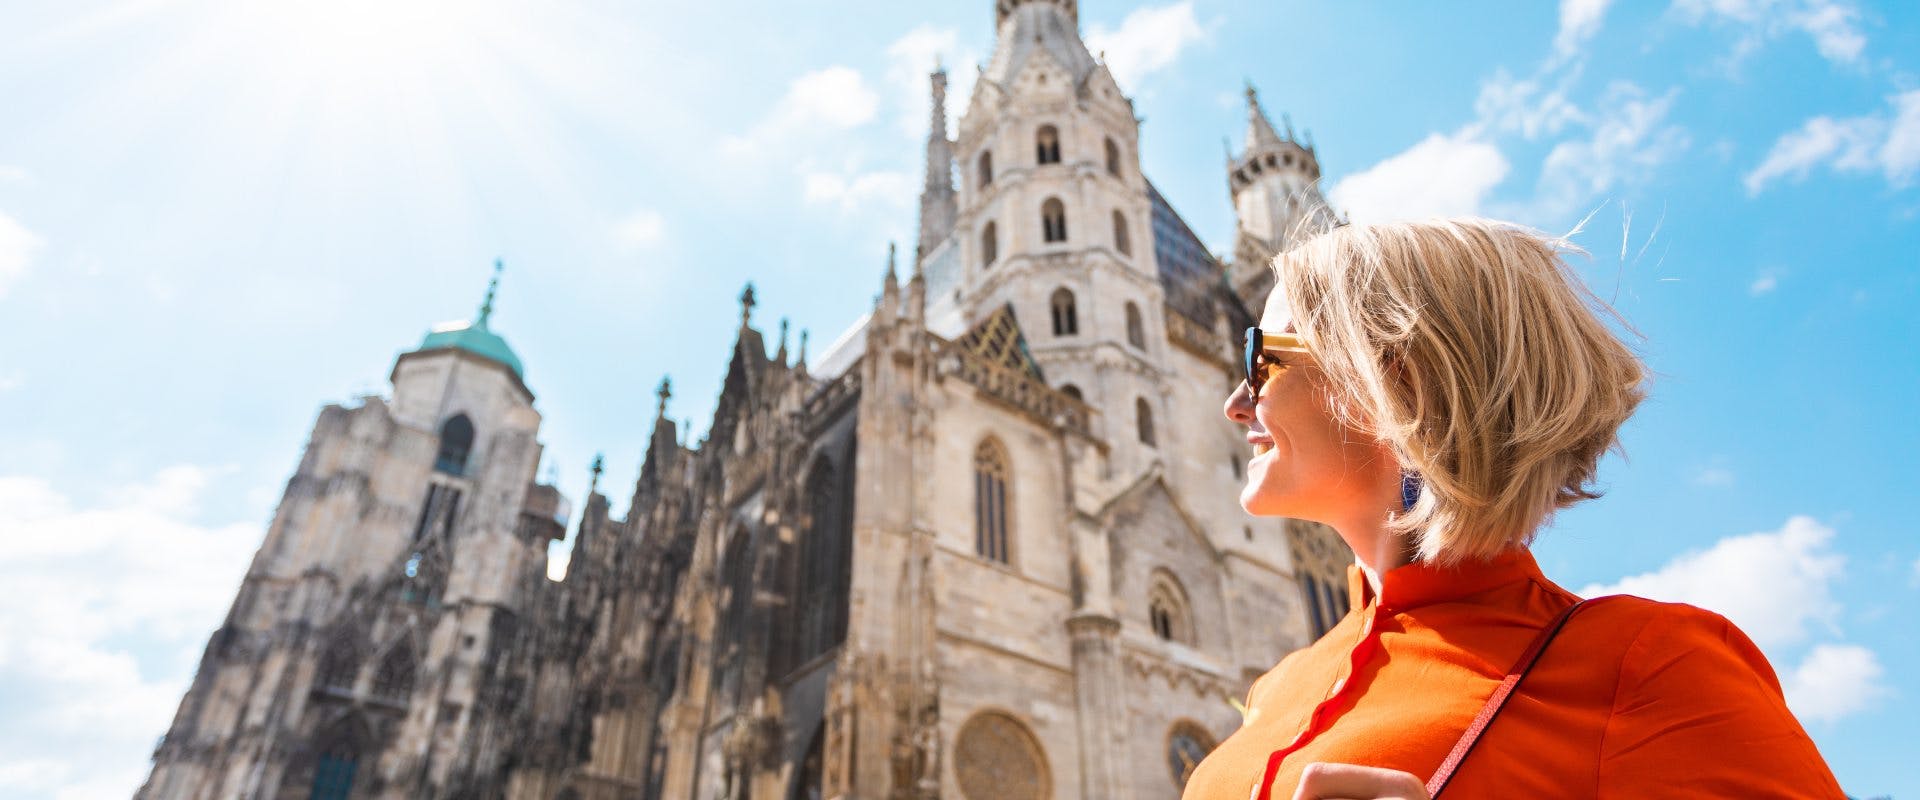 A solo female traveler outside St. Stephen’s Cathedral in Vienna.